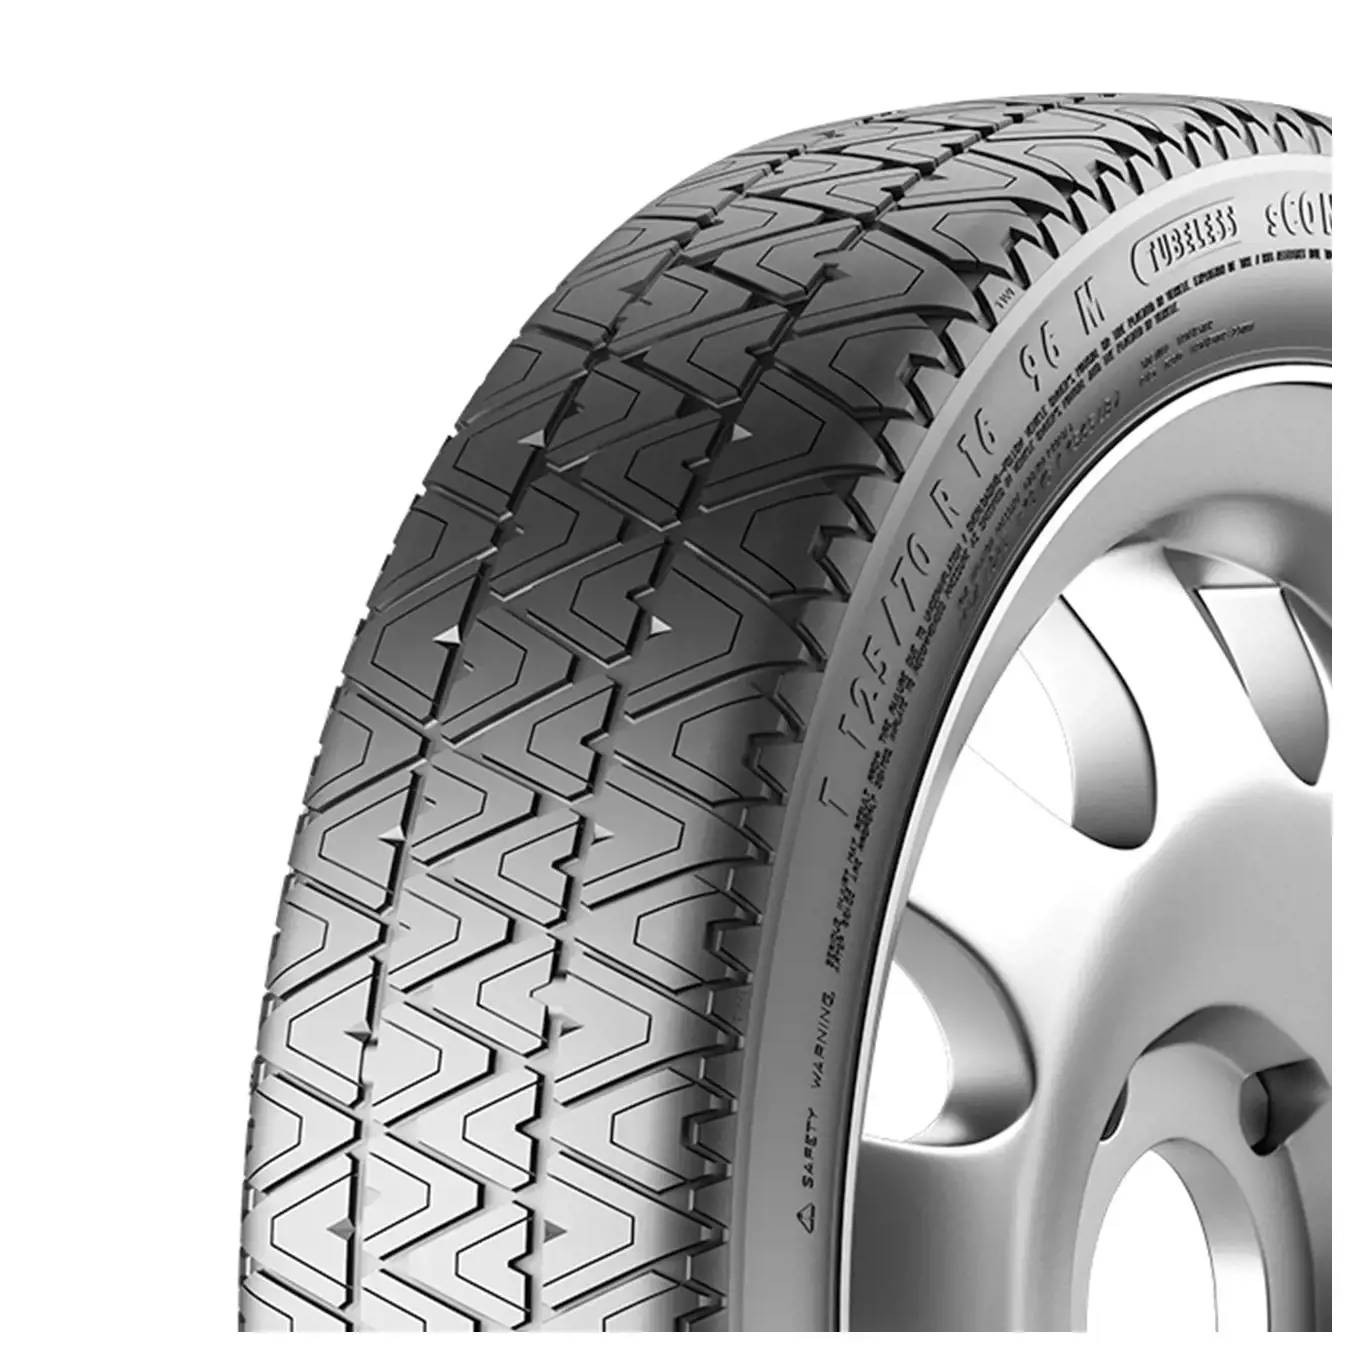 T125/80 R16 97M sContact